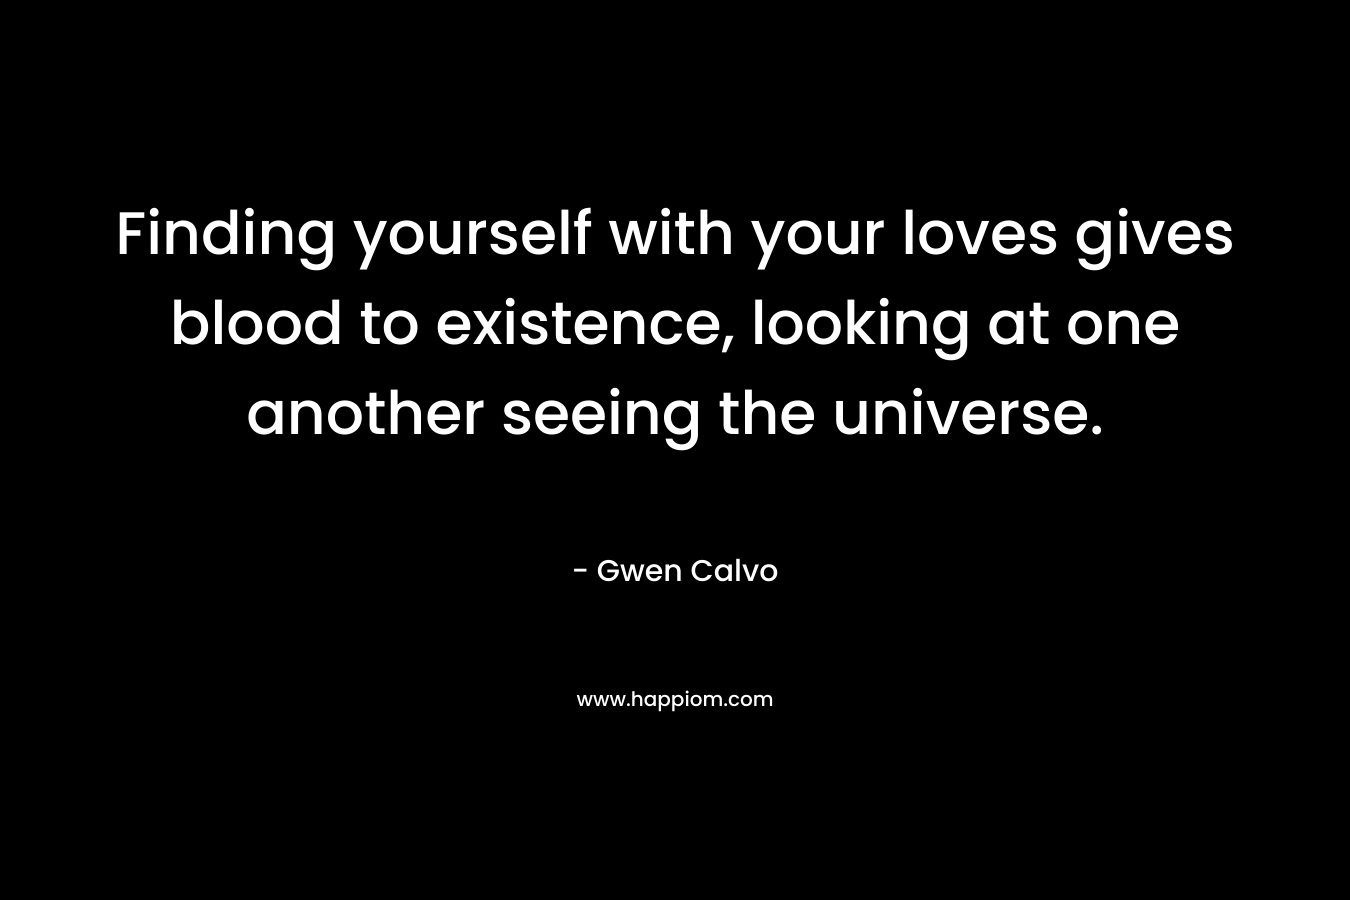 Finding yourself with your loves gives blood to existence, looking at one another seeing the universe.